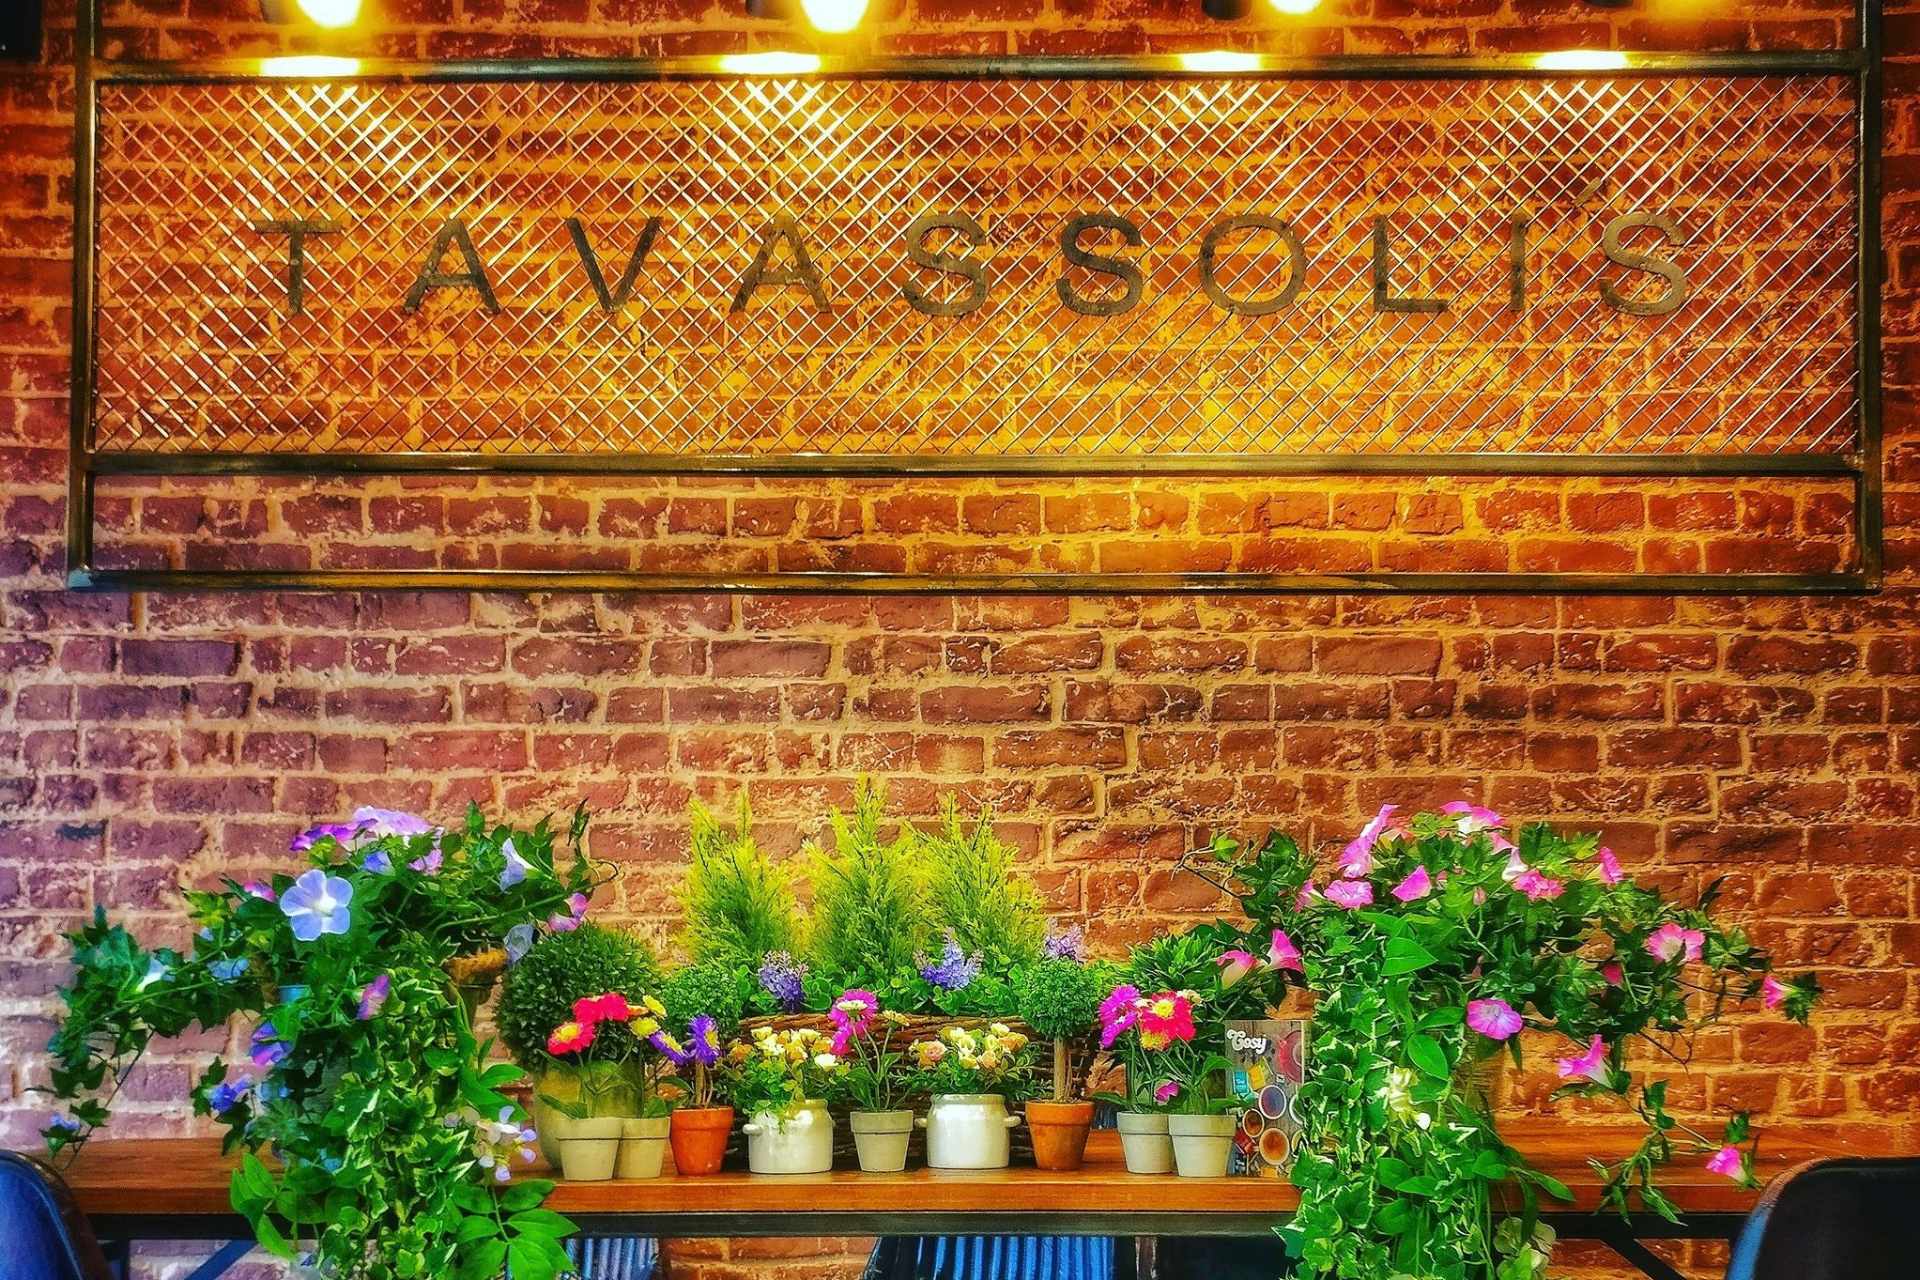 flowers-and-plants-on-table-in-front-of-brick-wall-with-tavassolis-sign